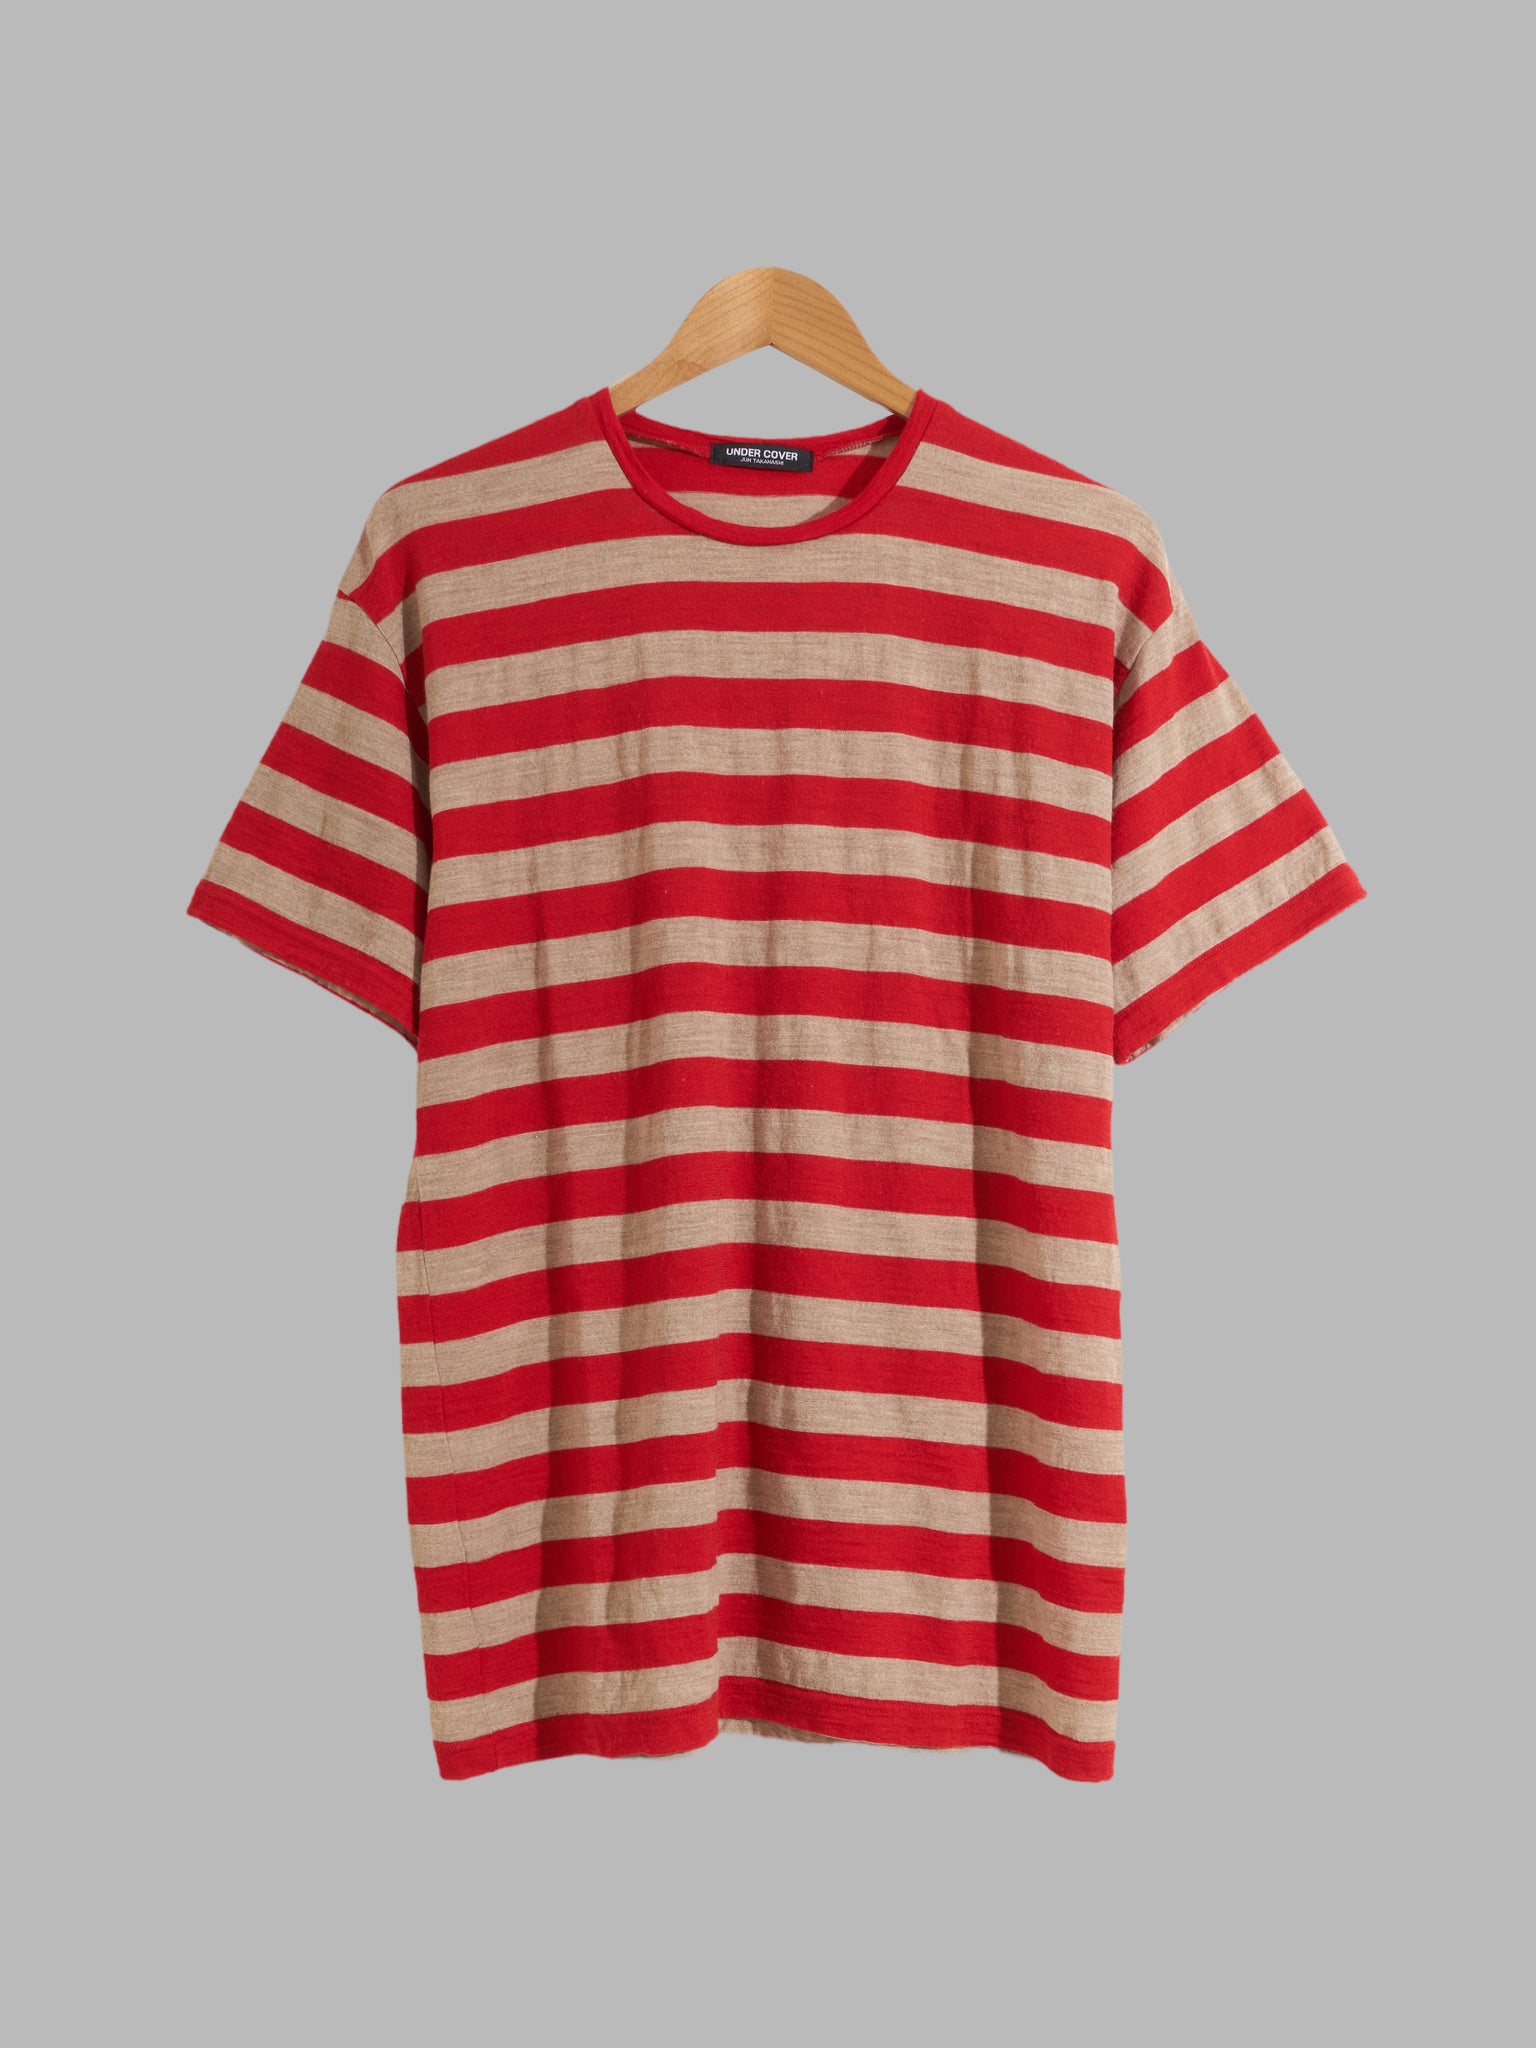 Undercover AW1997 red beige wool jersey horizontal stripe t-shirt - S